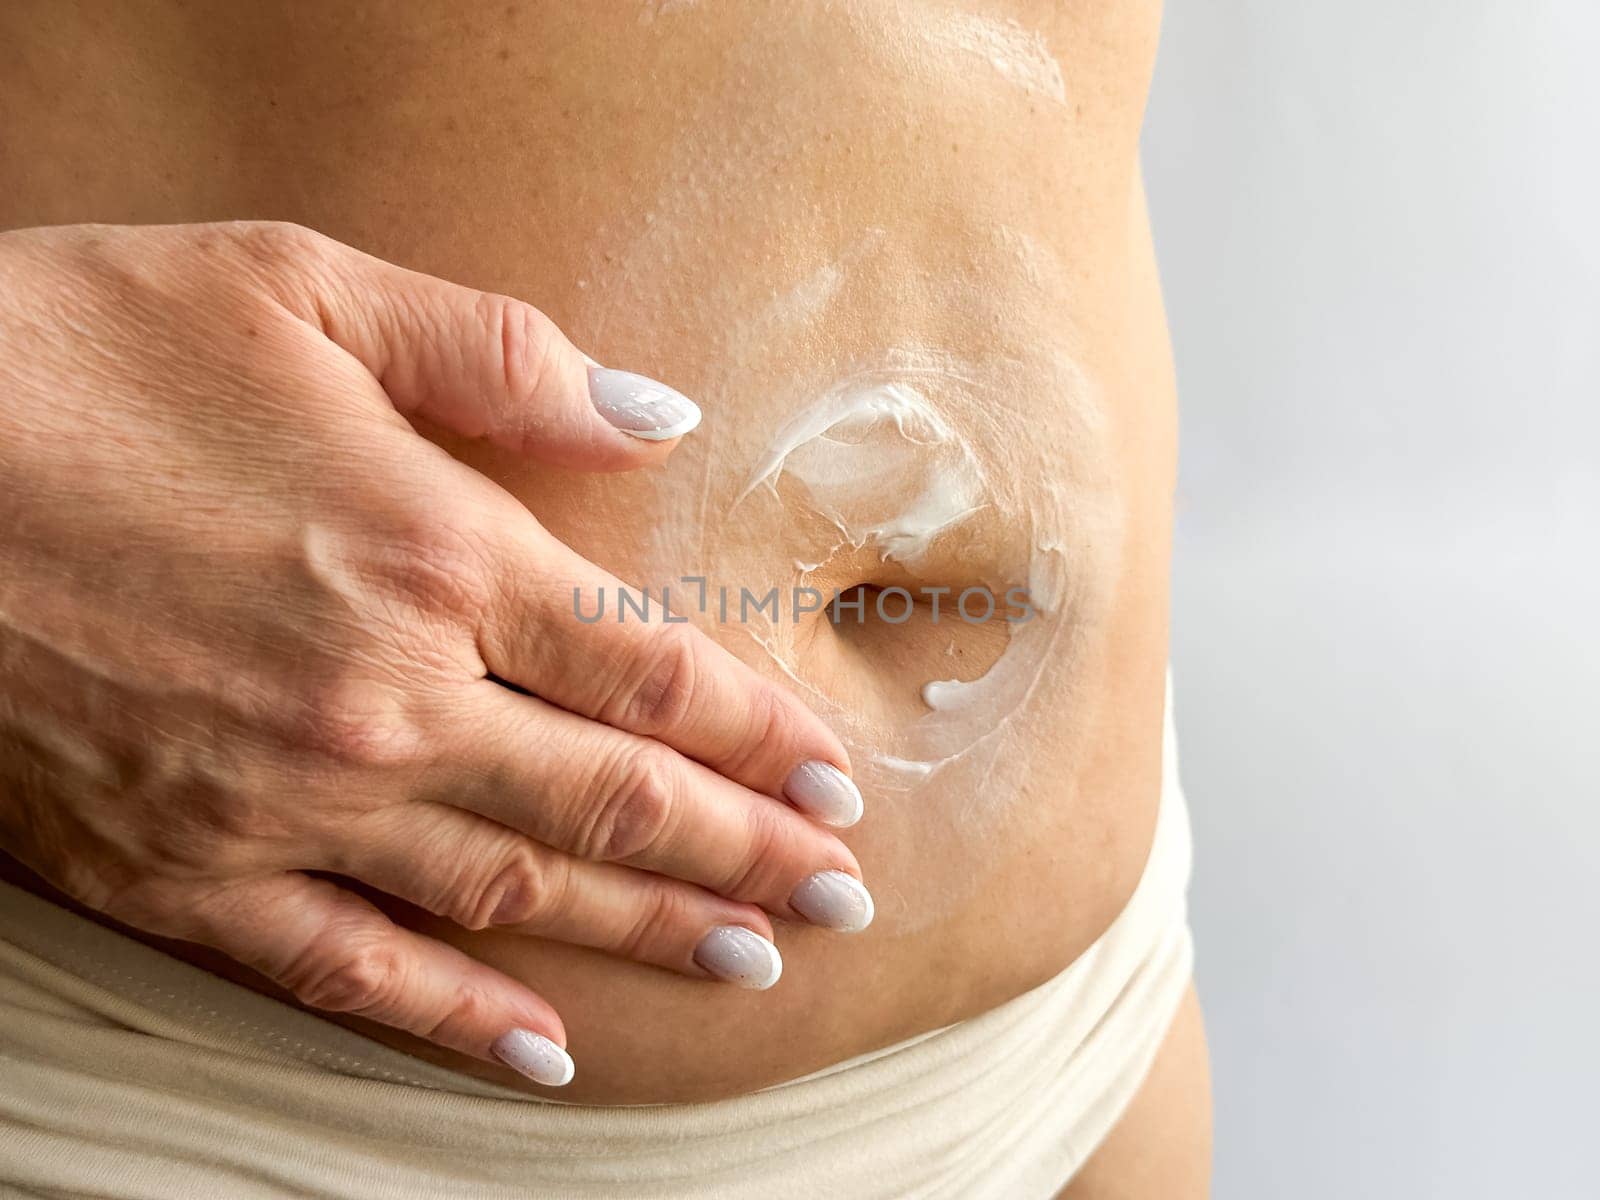 Close up of womans hand with white manicured nails applying cream to her stomach. Highlights skincare, body care, and personal hygiene, focusing on moisturizing and self care routines. by Lunnica